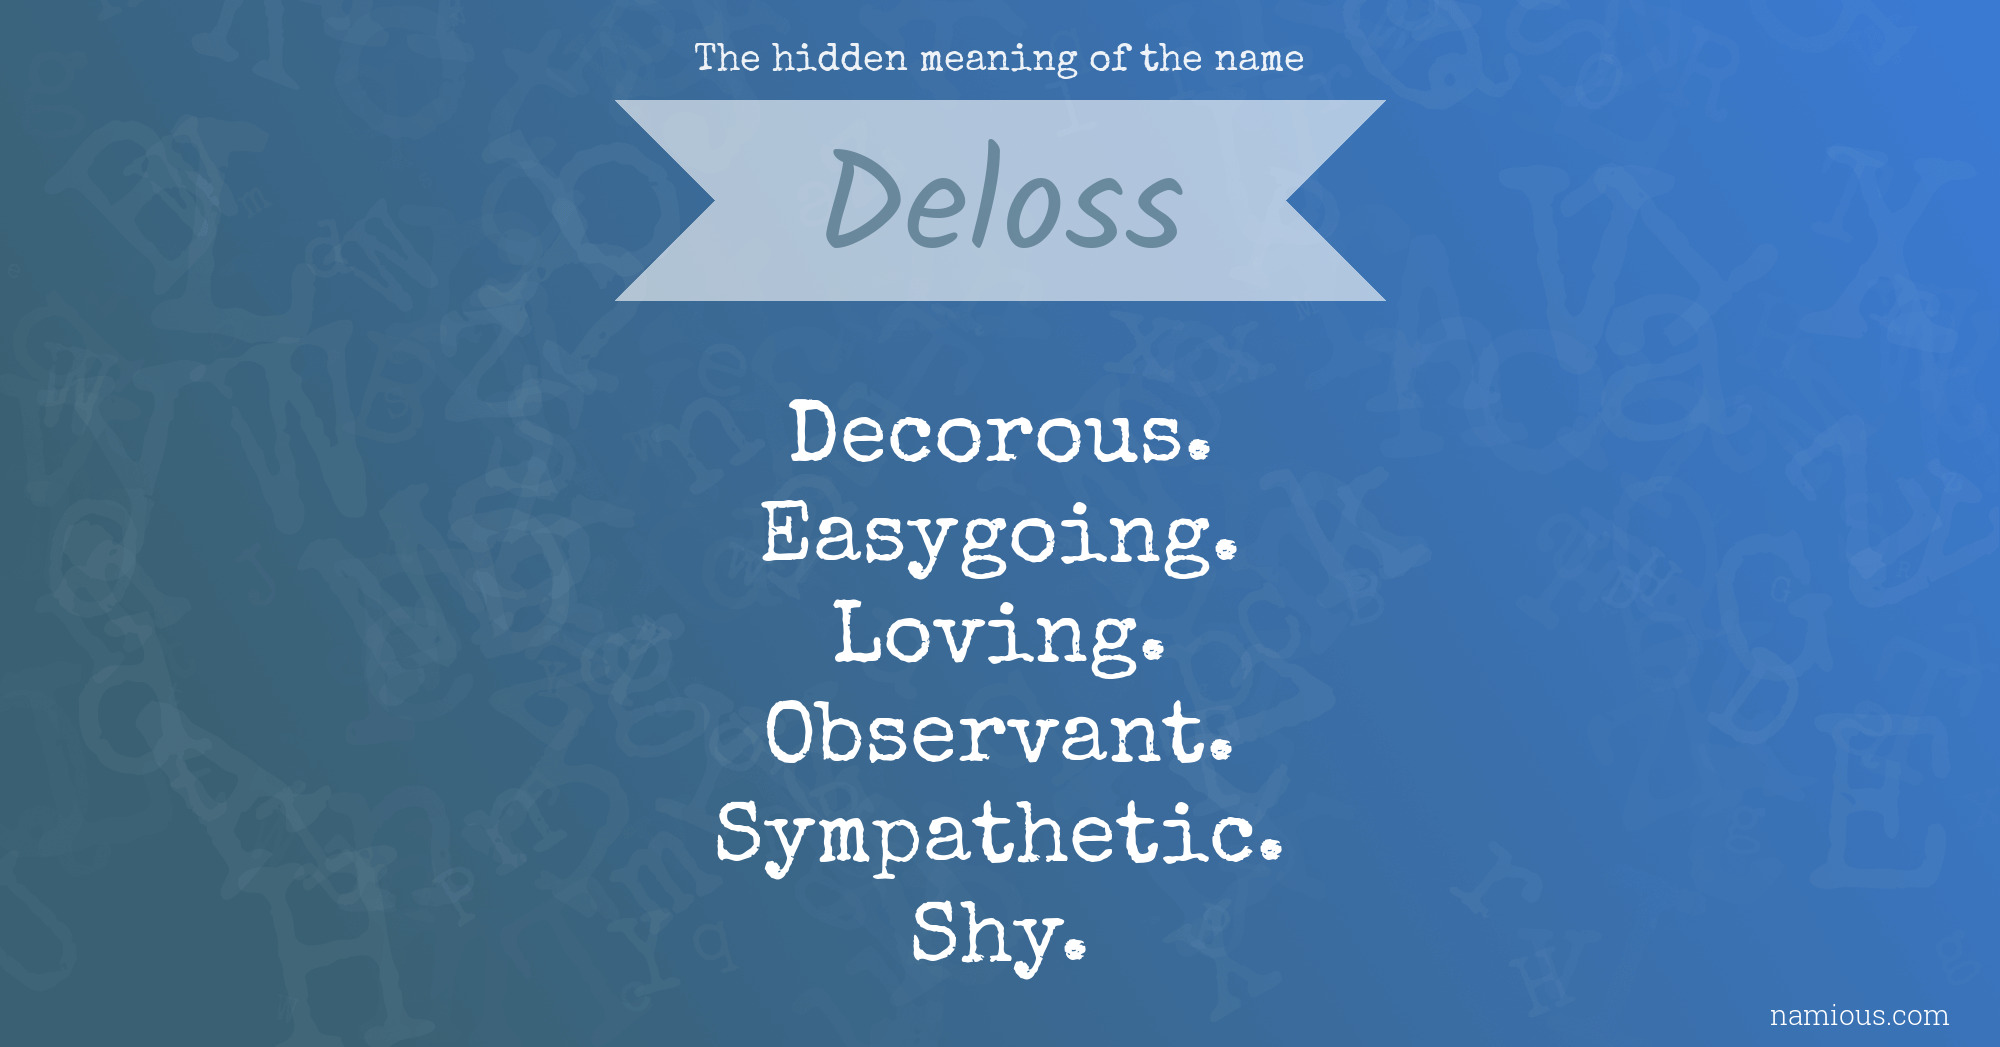 The hidden meaning of the name Deloss